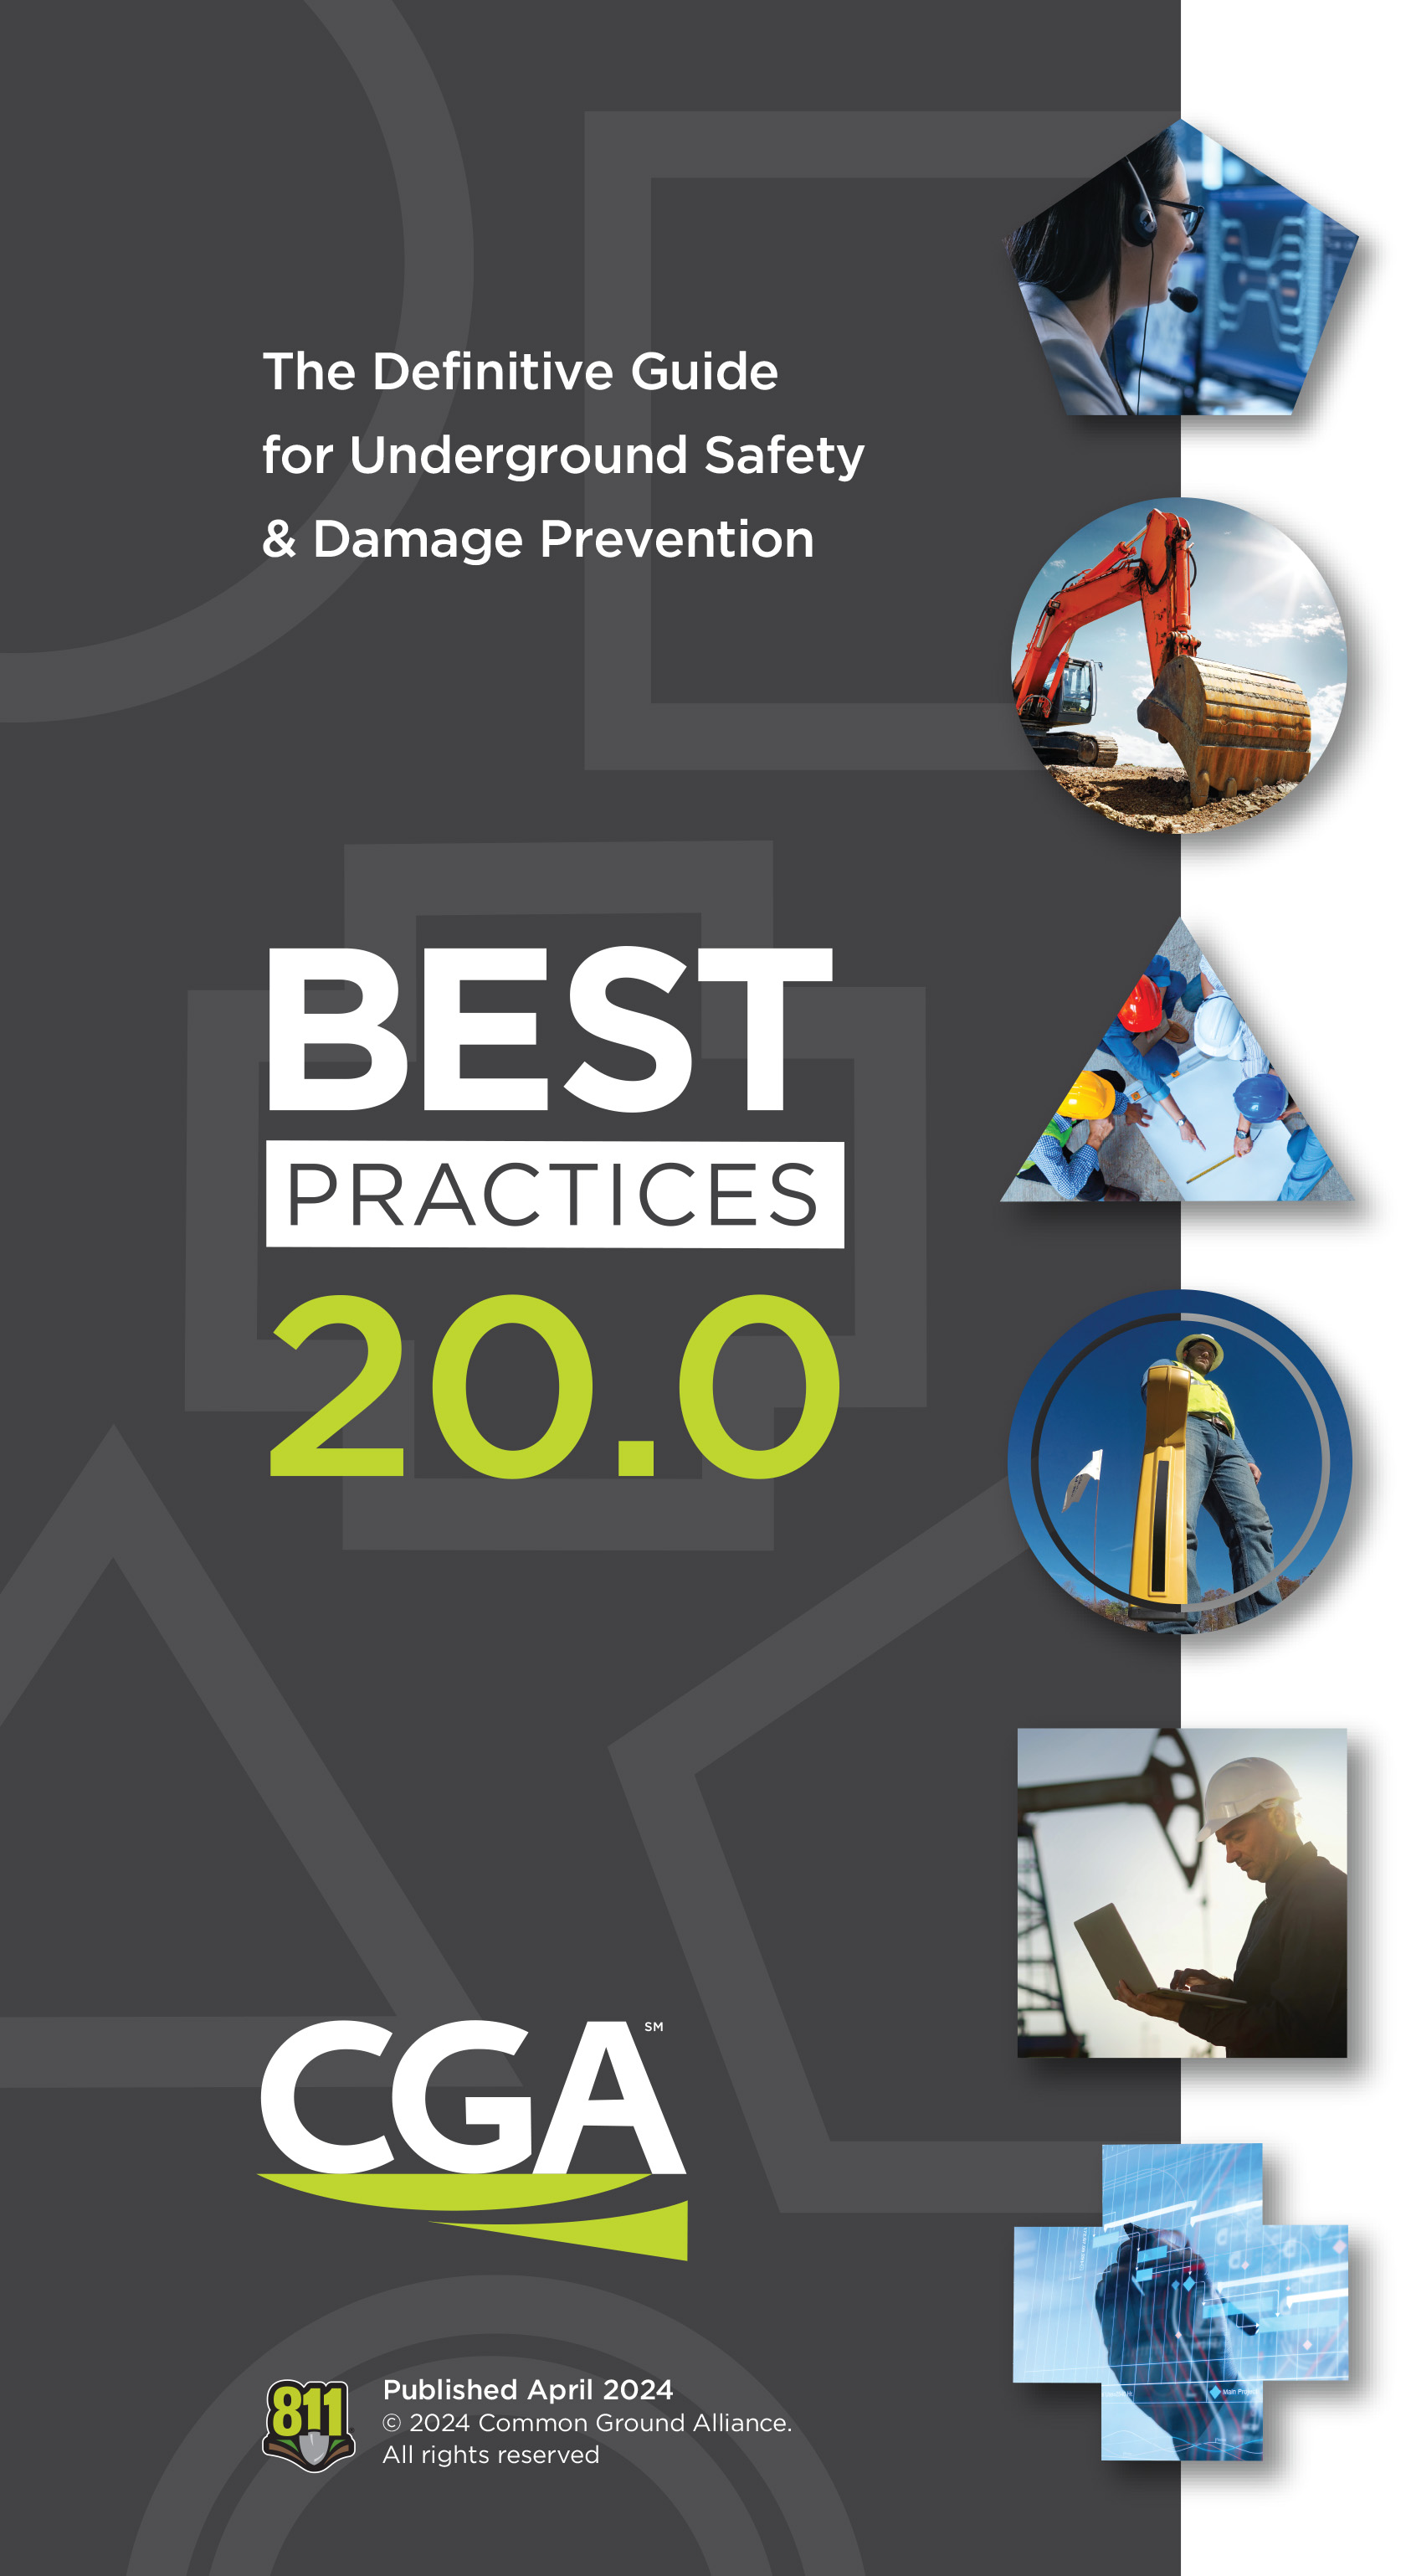 Best Practices - The Definitive Guide for Underground Safety & Damage Prevention